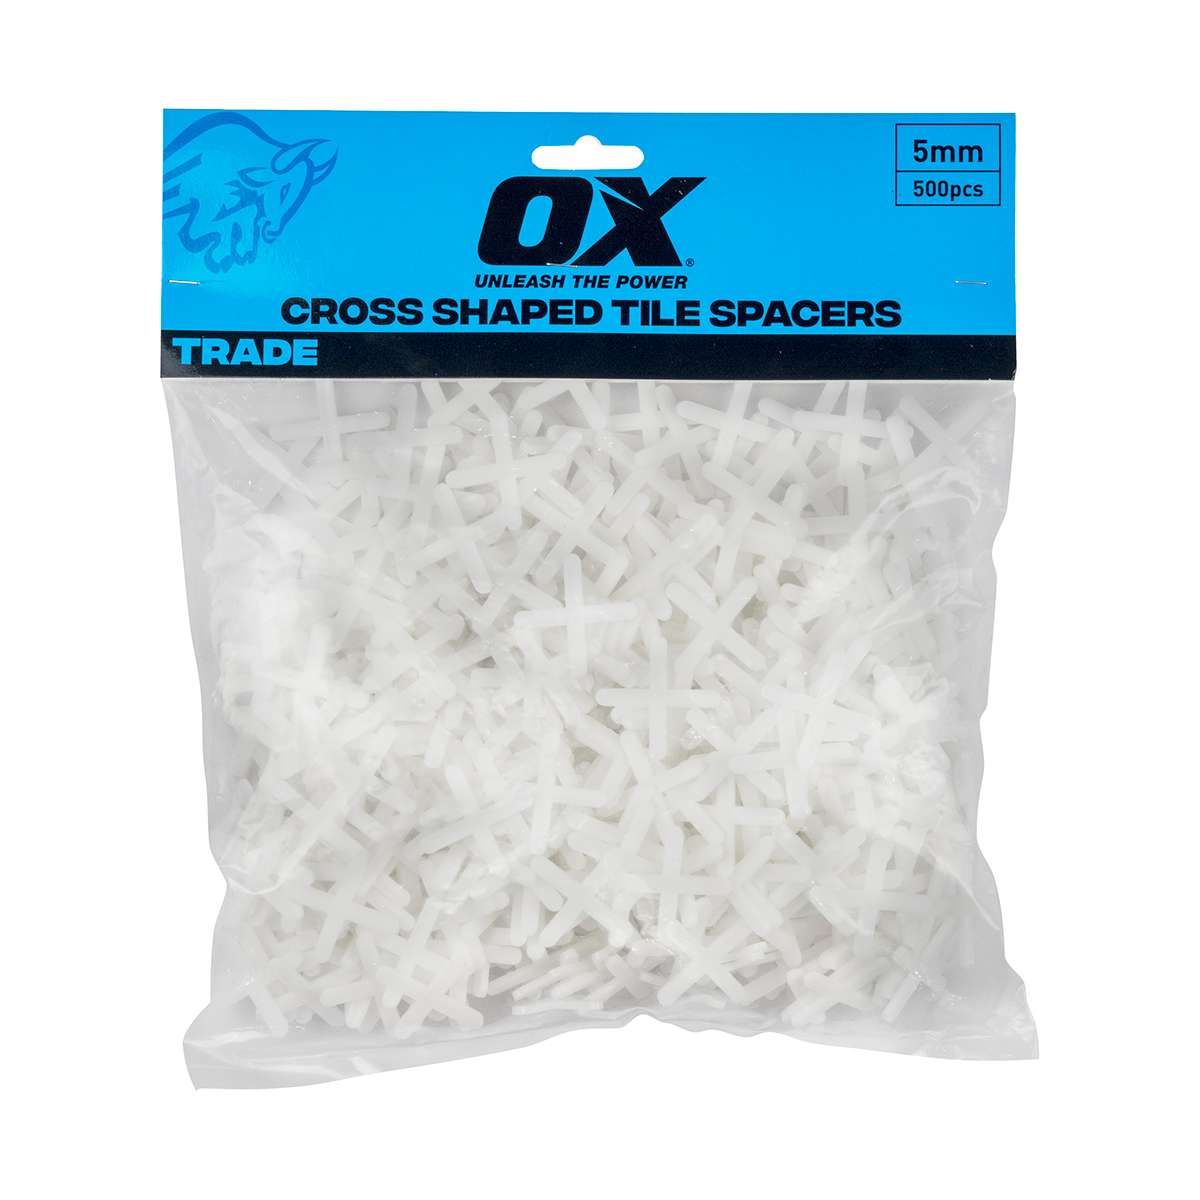 Cross Shape Tile Spacers by Ox